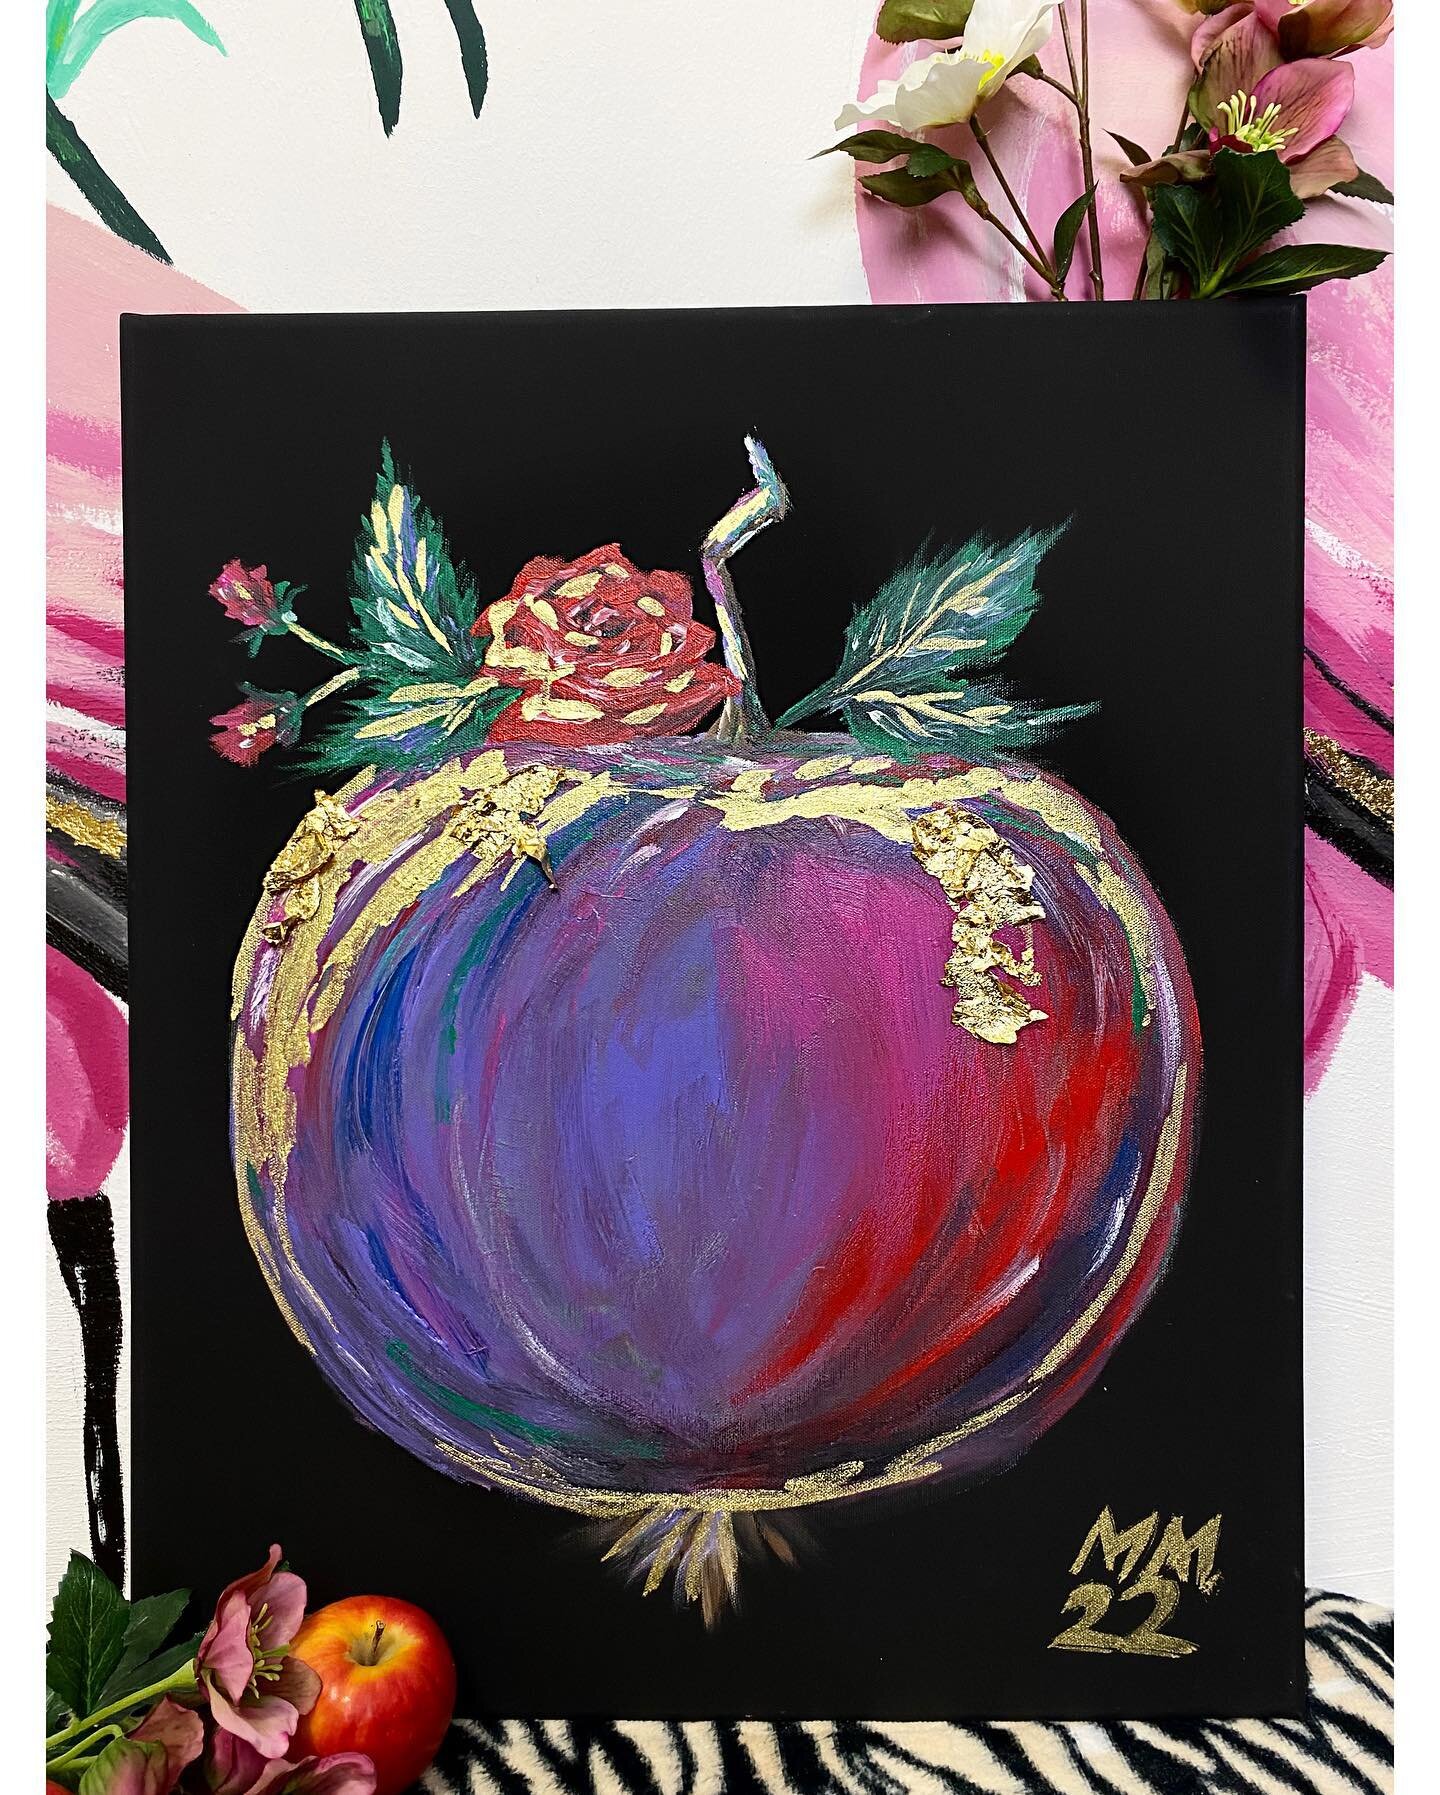 Apple with something extra 🍎✨🌹 Just trying out something new. This one is also available. Working on the instagram shop here ! Thank you all 🖤🖤🖤 #art #artwork #applepainting #maximalismart #mariamakurat #acrylicpainting #goldart #apple #colorful